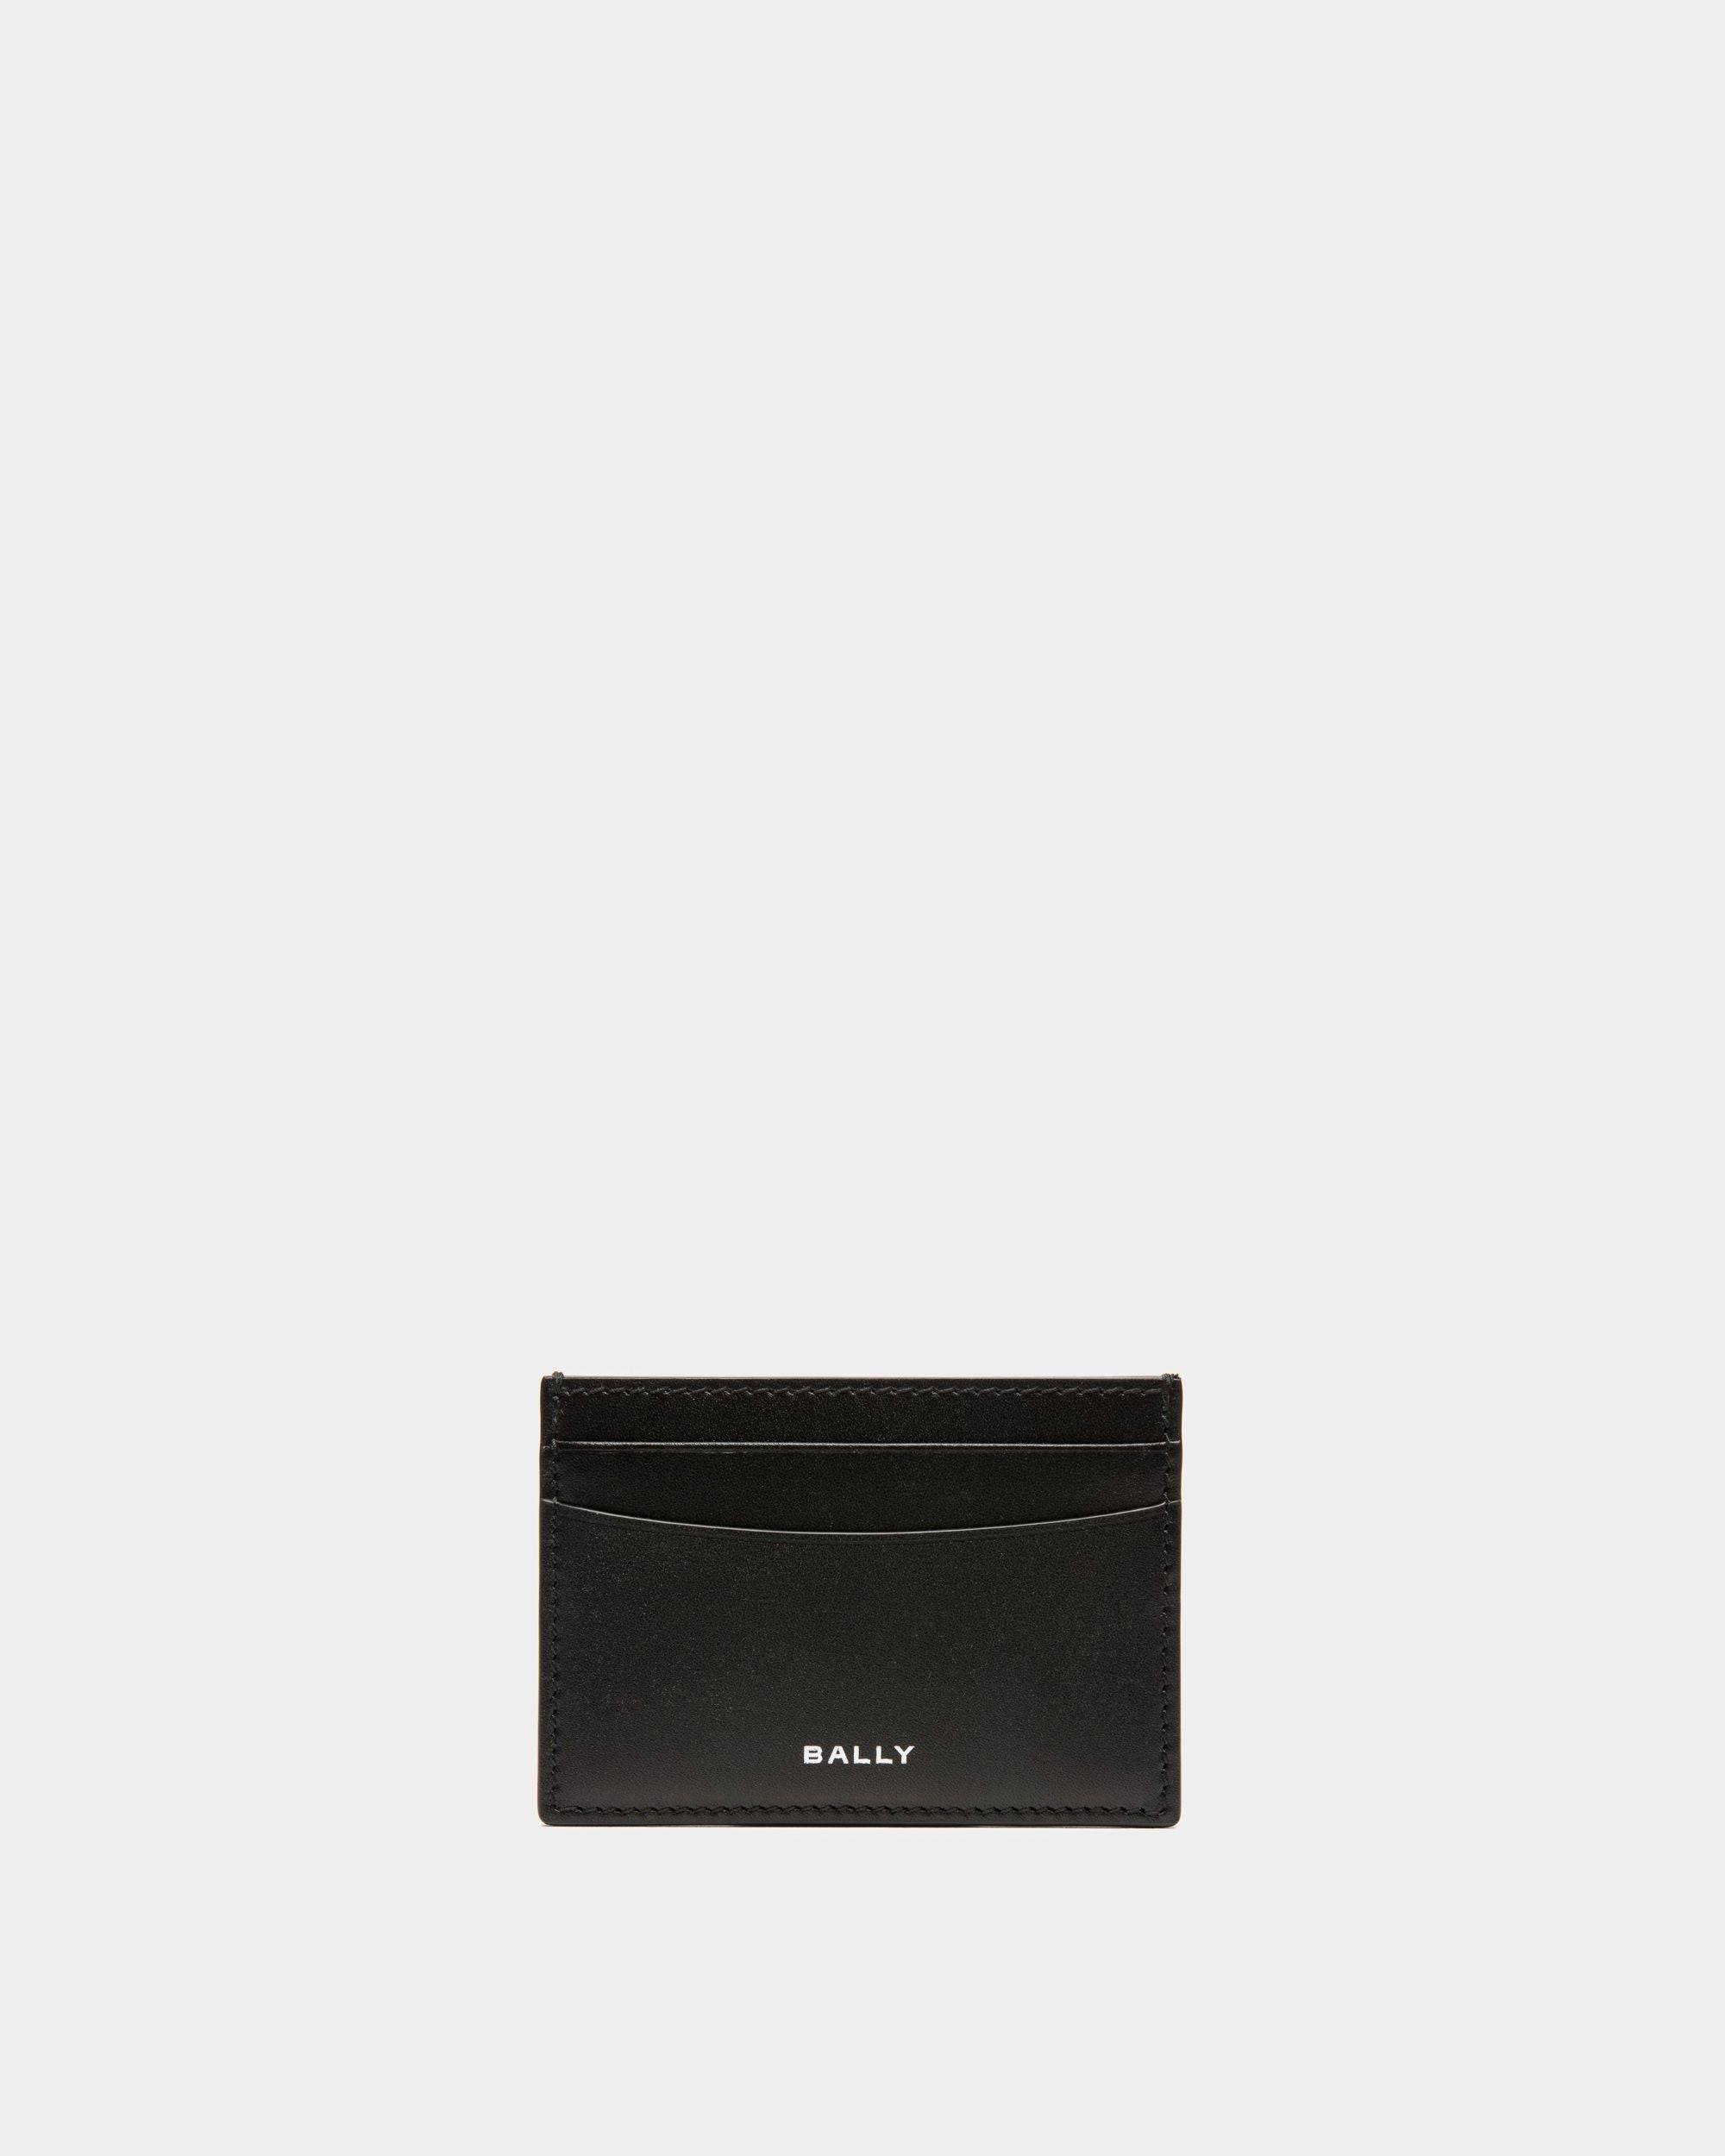 Men's Busy Bally Card Holder in Black Leather | Bally | Still Life Front